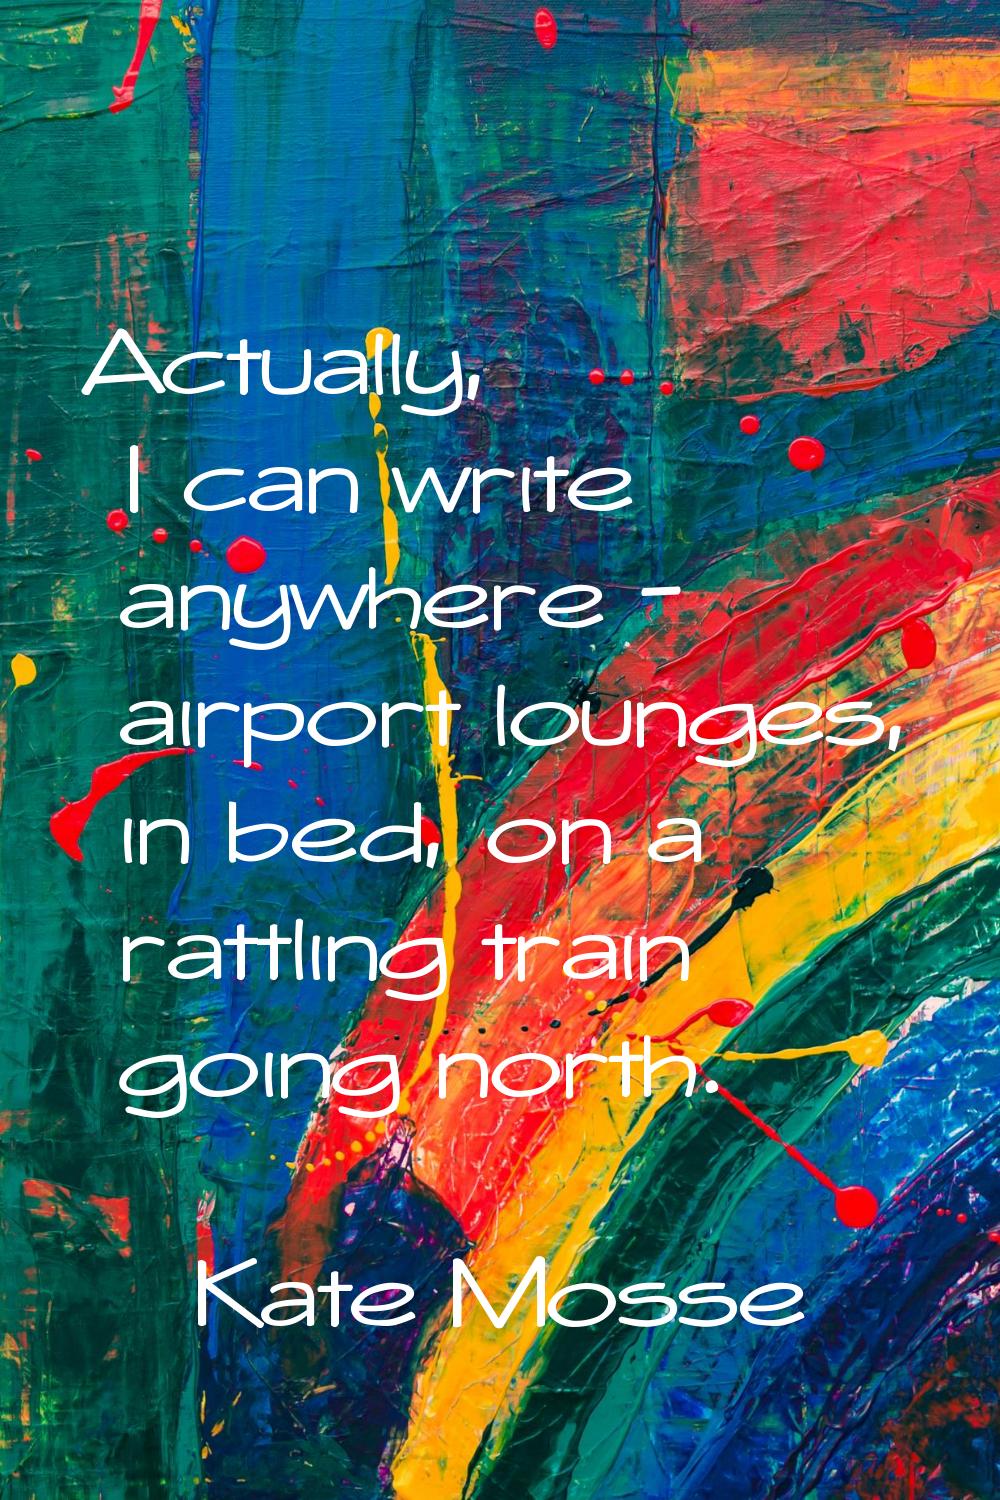 Actually, I can write anywhere - airport lounges, in bed, on a rattling train going north.